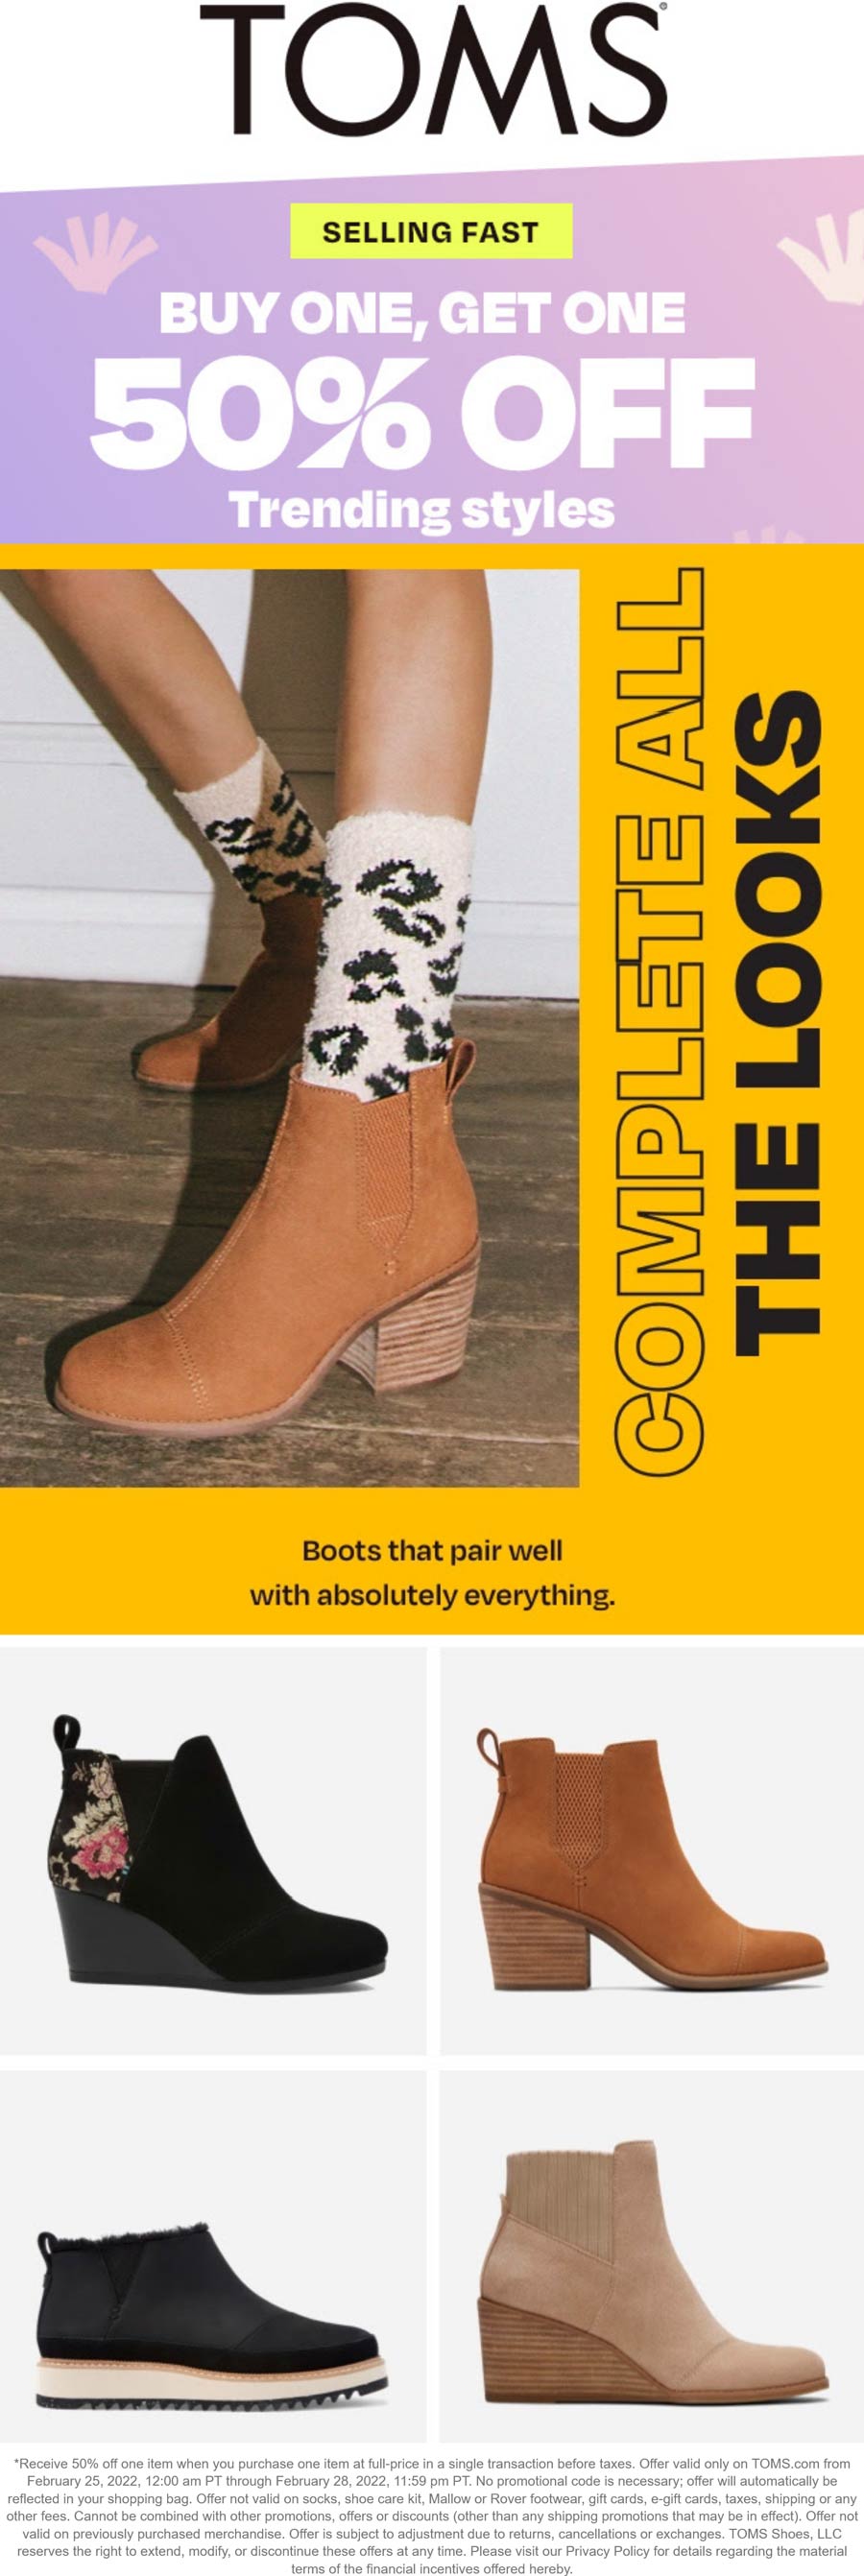 TOMS stores Coupon  Second pair 50% off at TOMS shoes #toms 